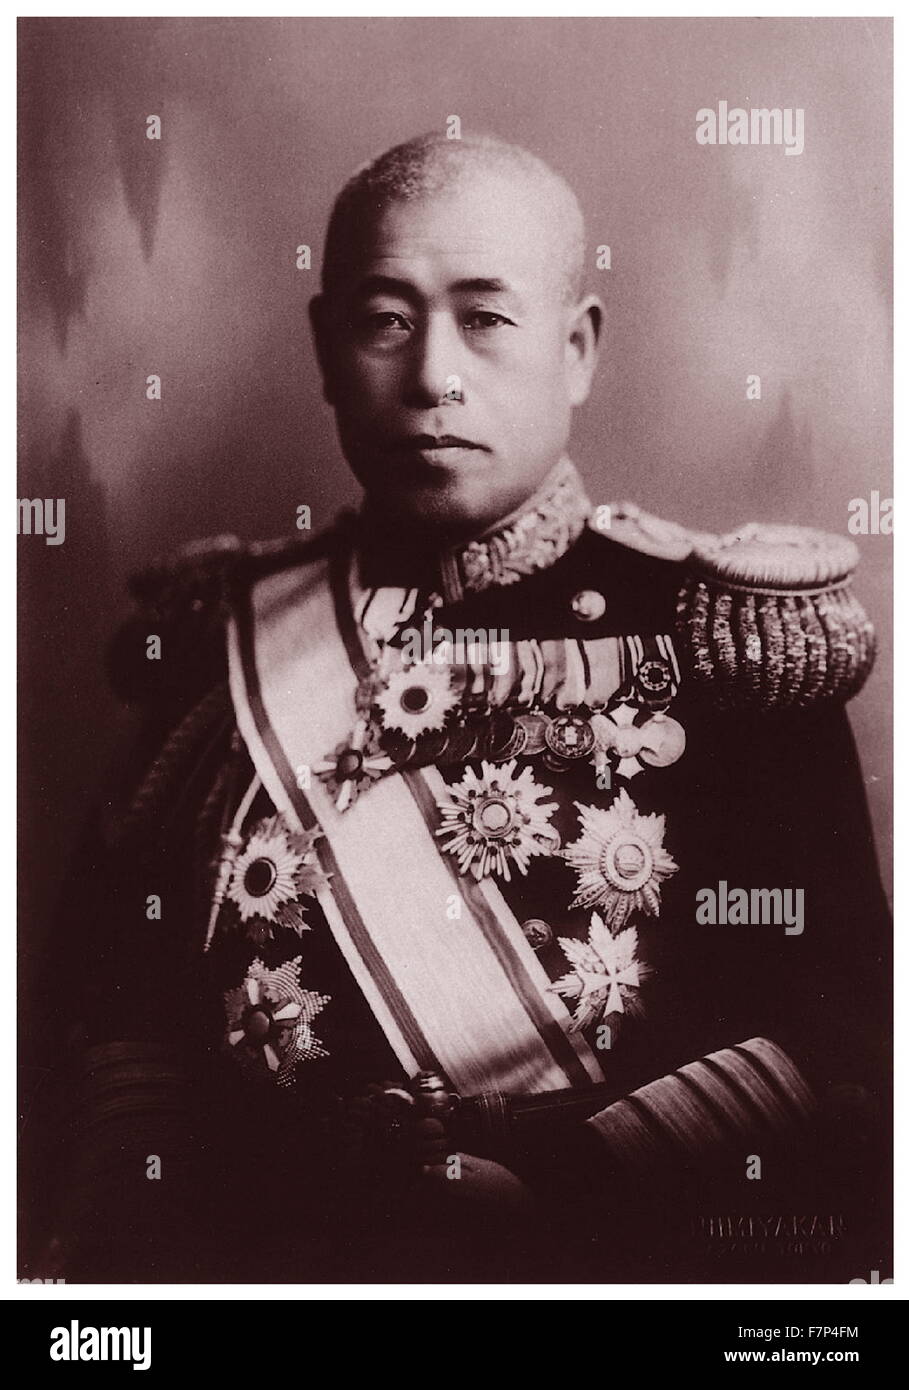 Photograph of Isoroku Yamamoto (1884-1943) Japanese Marshal Admiral and the  commander-in-chief of the Combined Fleet during World War II. Dated 1942  Stock Photo - Alamy